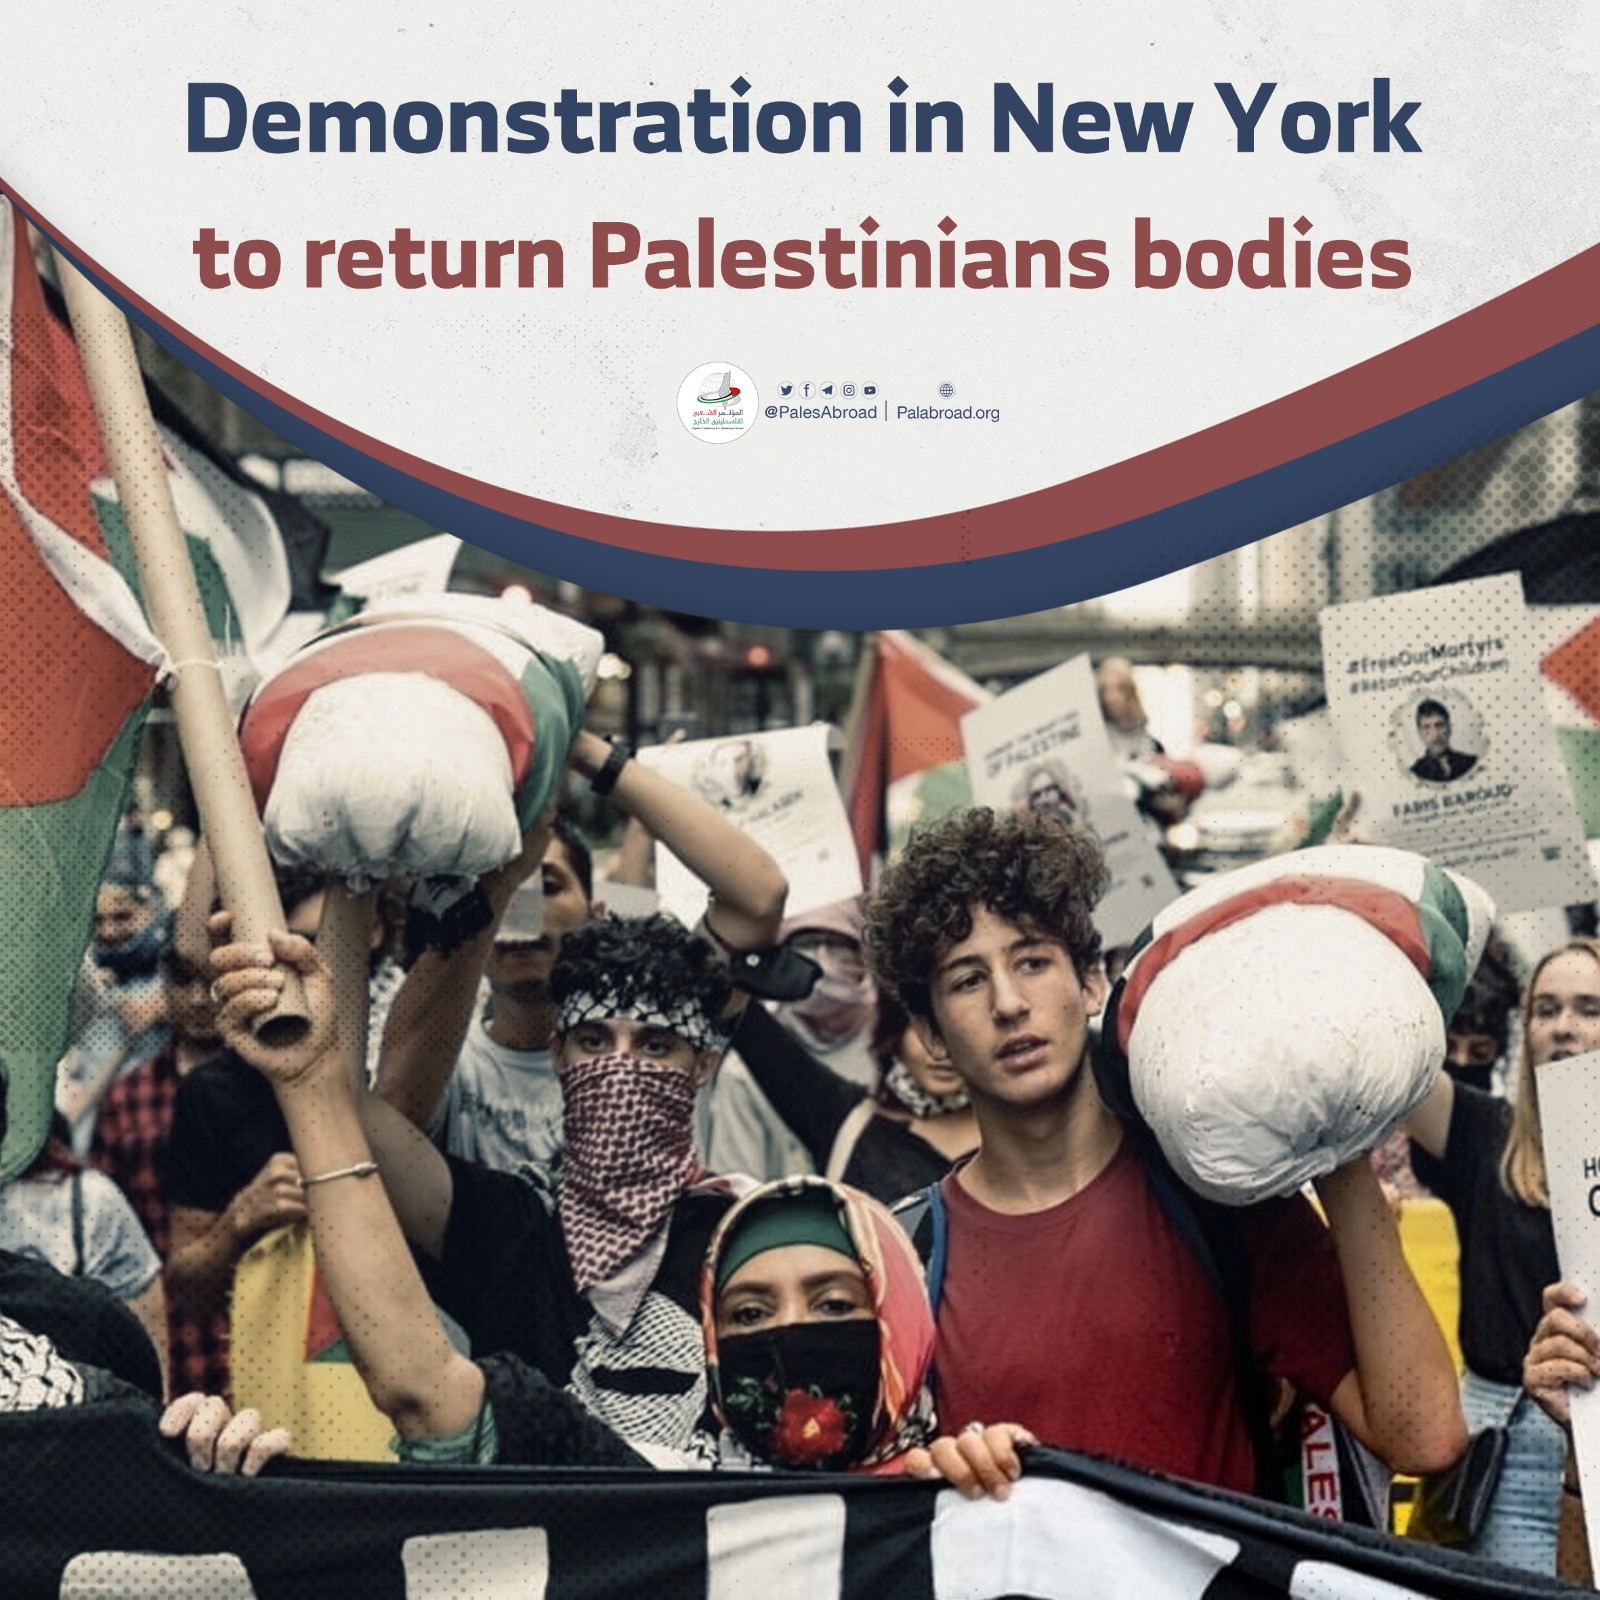 Demonstration in New York demanding the return of the bodies of Palestinian martyrs held by “Israel”